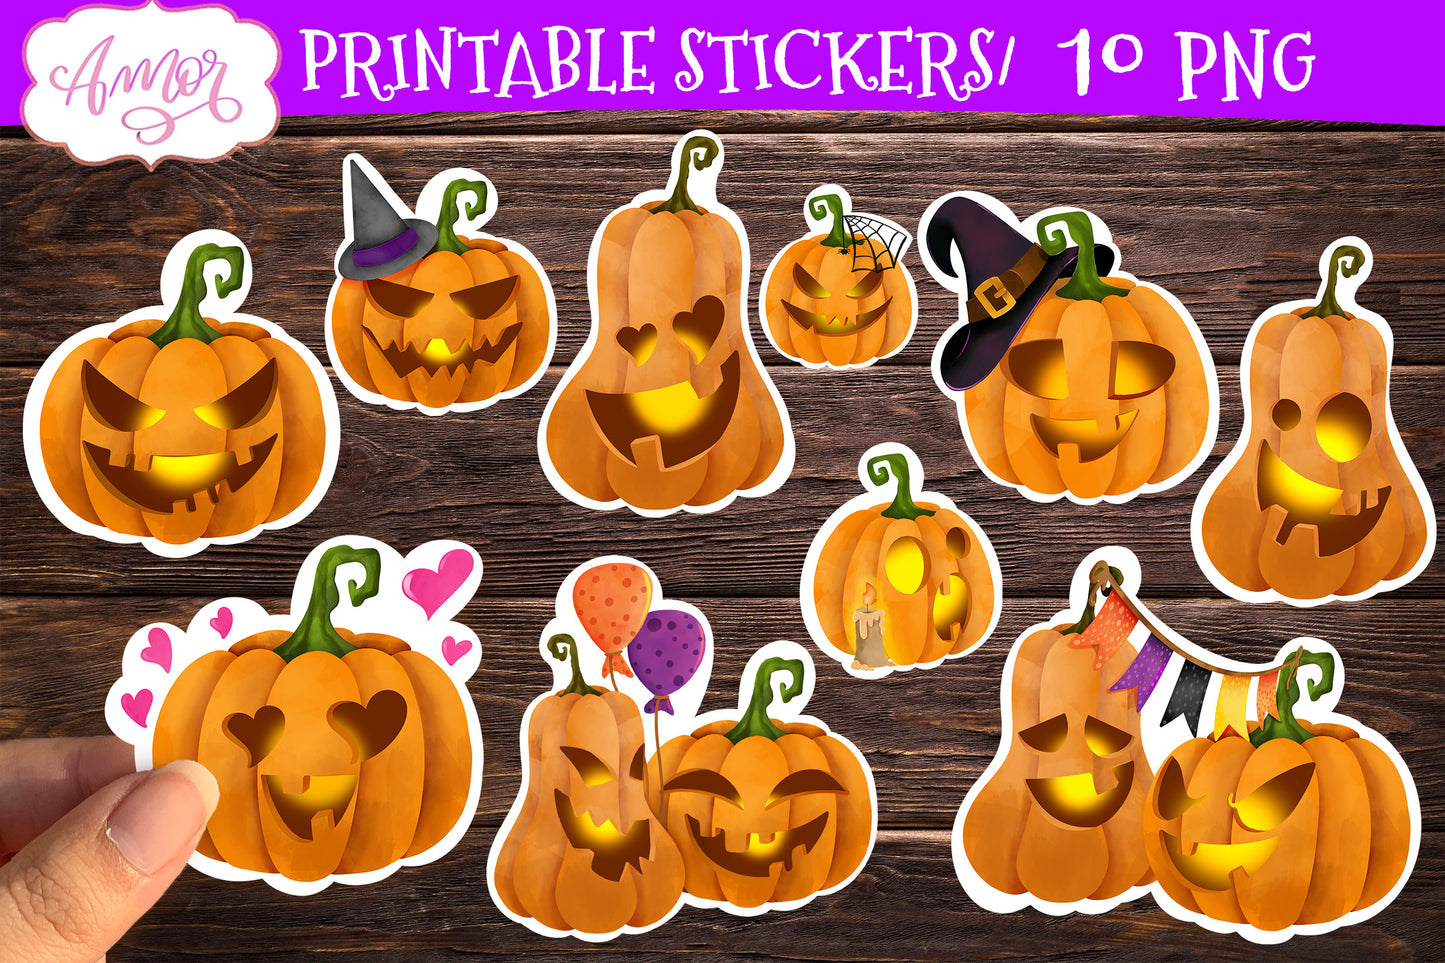 Halloween stickers for print & cut | Printable PNG stickers